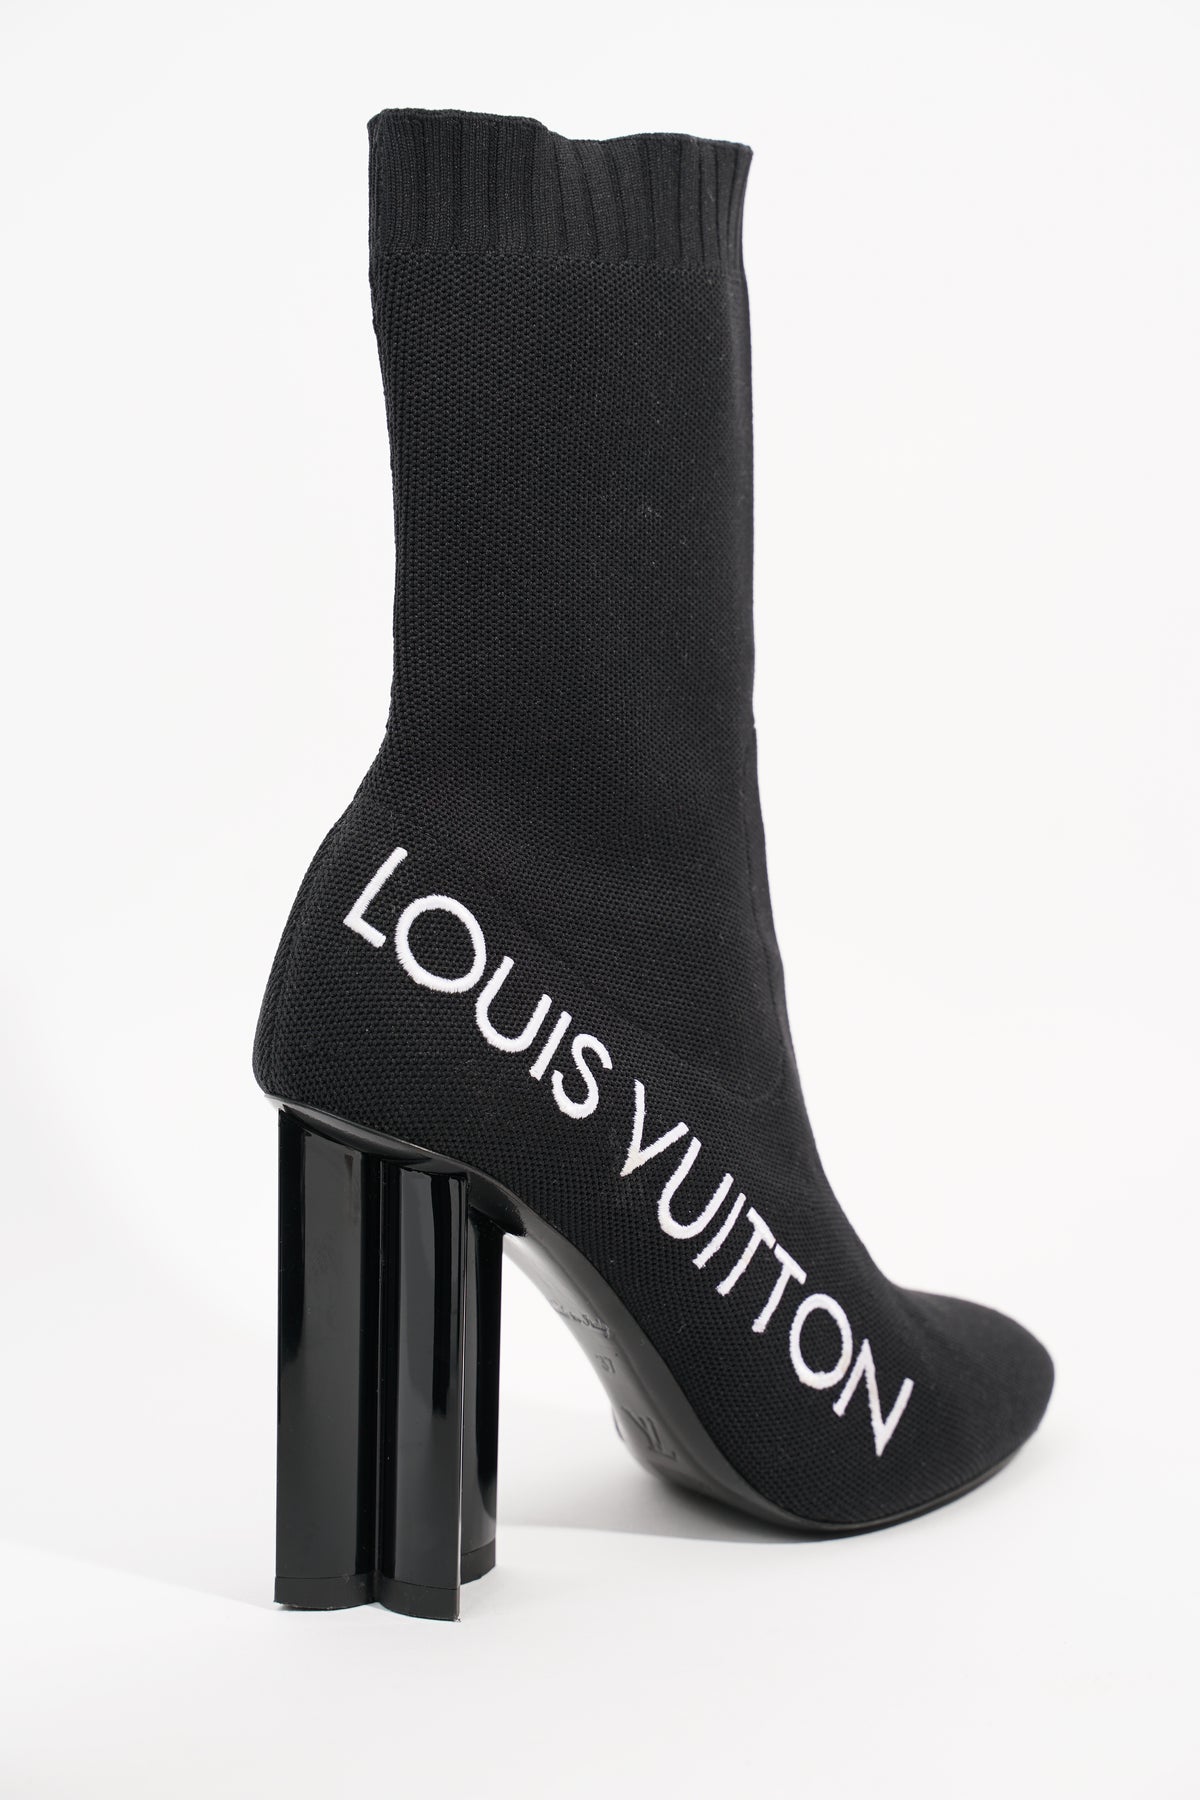 Louis Vuitton Womens Silhouette Ankle Boot Black White EU 37 / UK 4 – Luxe  Collective